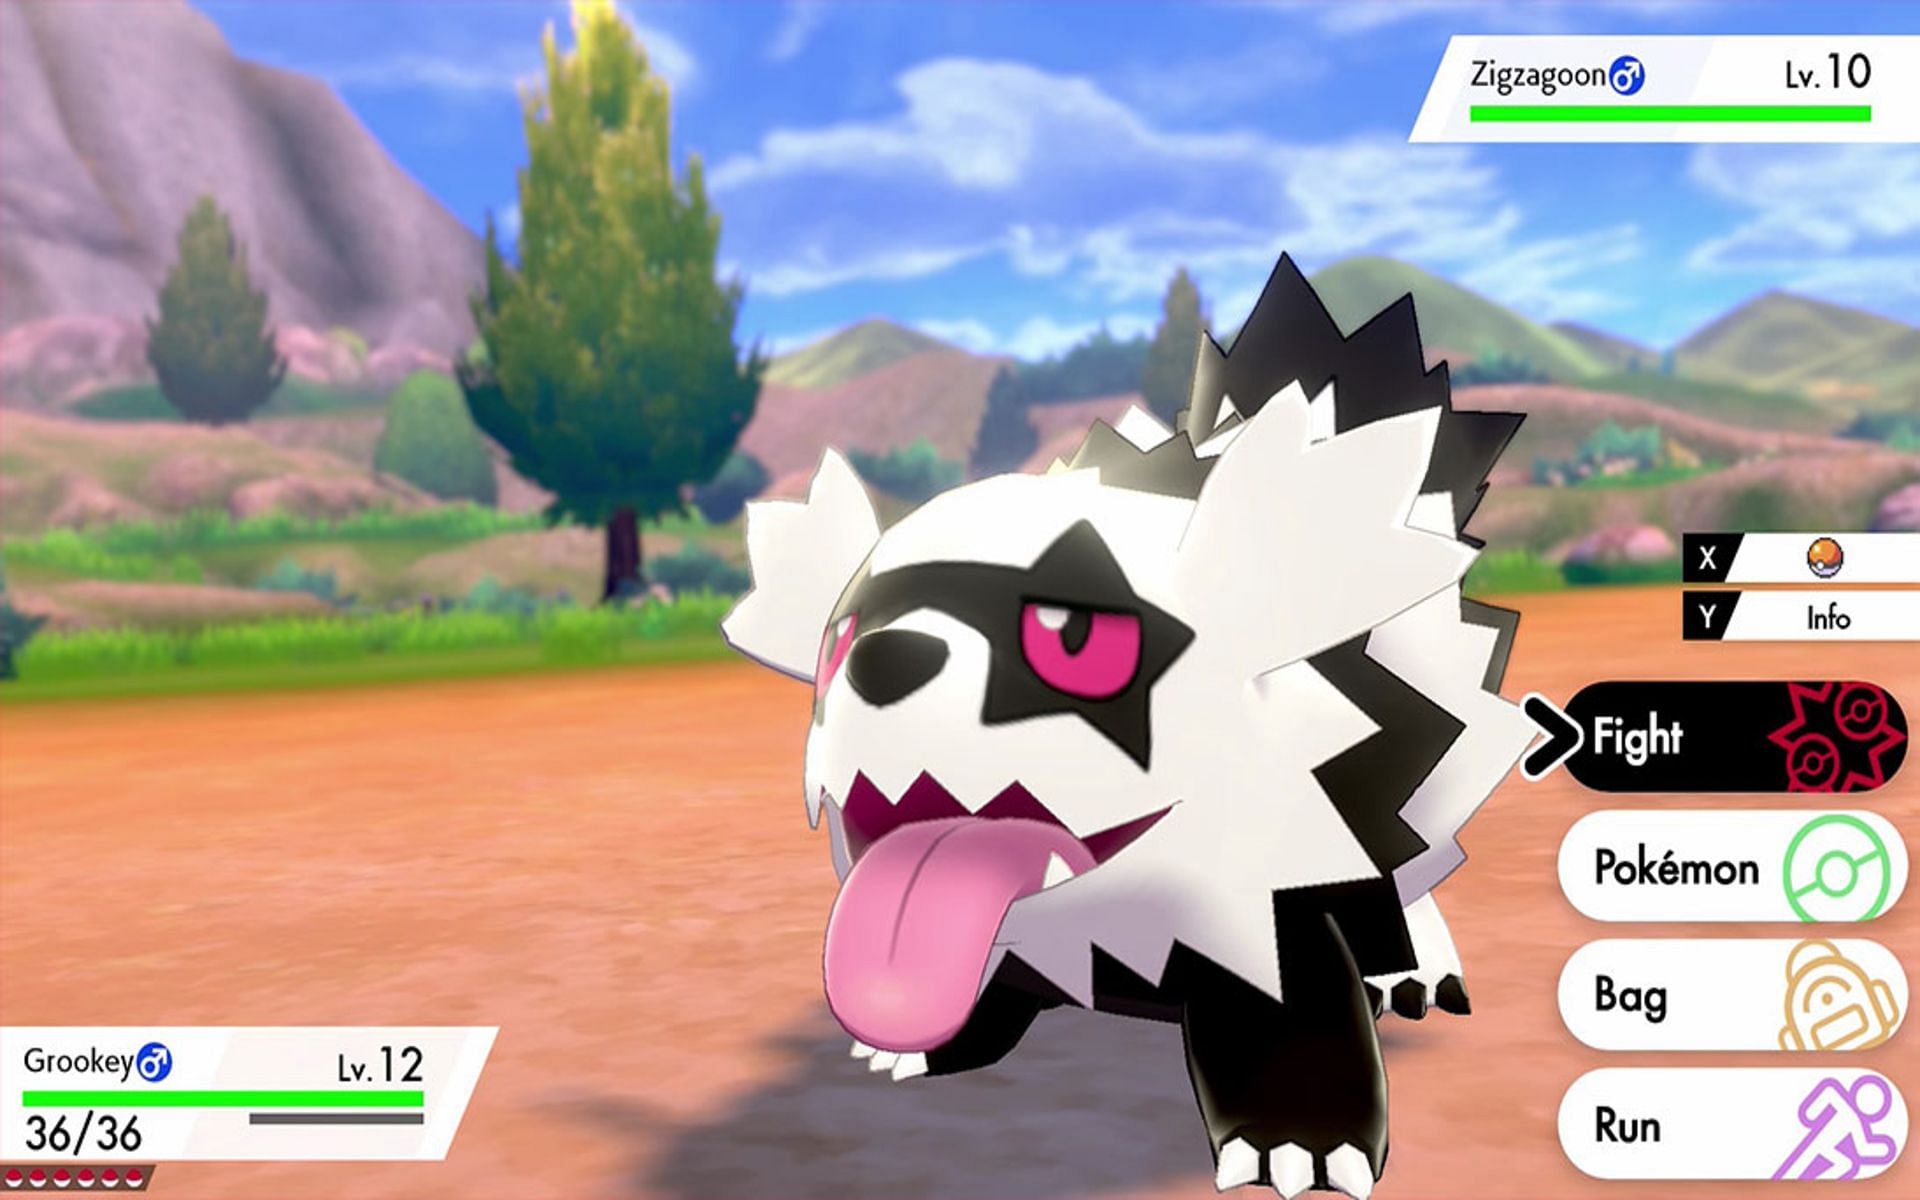 Zigzagoon received the Dark typing for its Galarian form (Image via Game Freak)